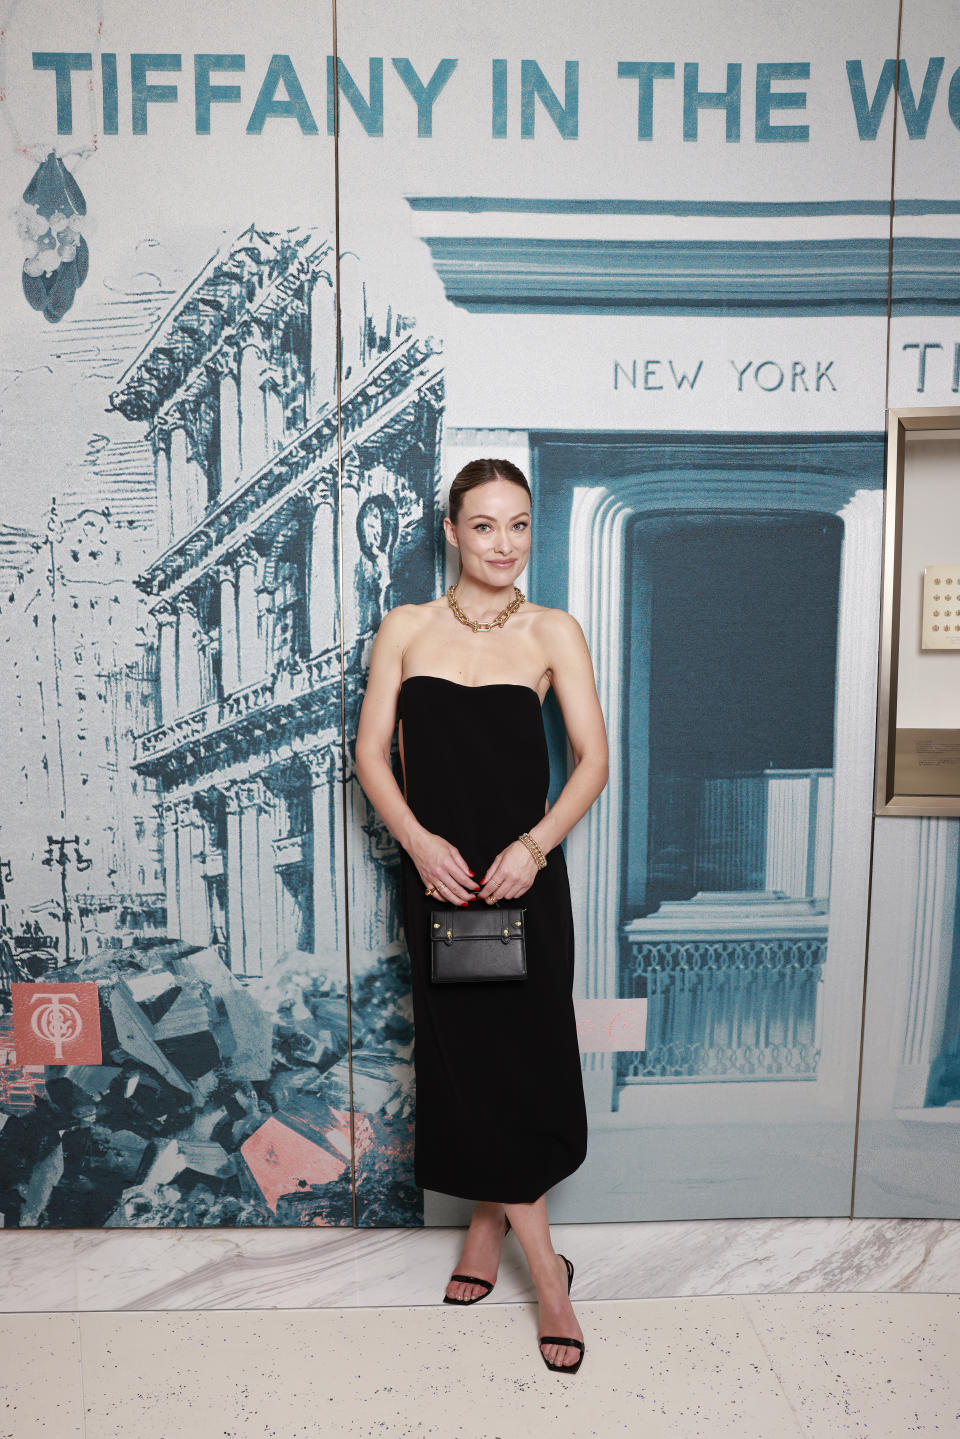 TOKYO, JAPAN - APRIL 11: Olivia Wilde attends Tiffany & Co.'s opening celebration for the House's 'Tiffany Wonder' exhibition at the TOKYO NODE gallery on April 11, 2024 in Tokyo, Japan. (Photo by Hanna Lassen/Getty Images for Tiffany & Co.)